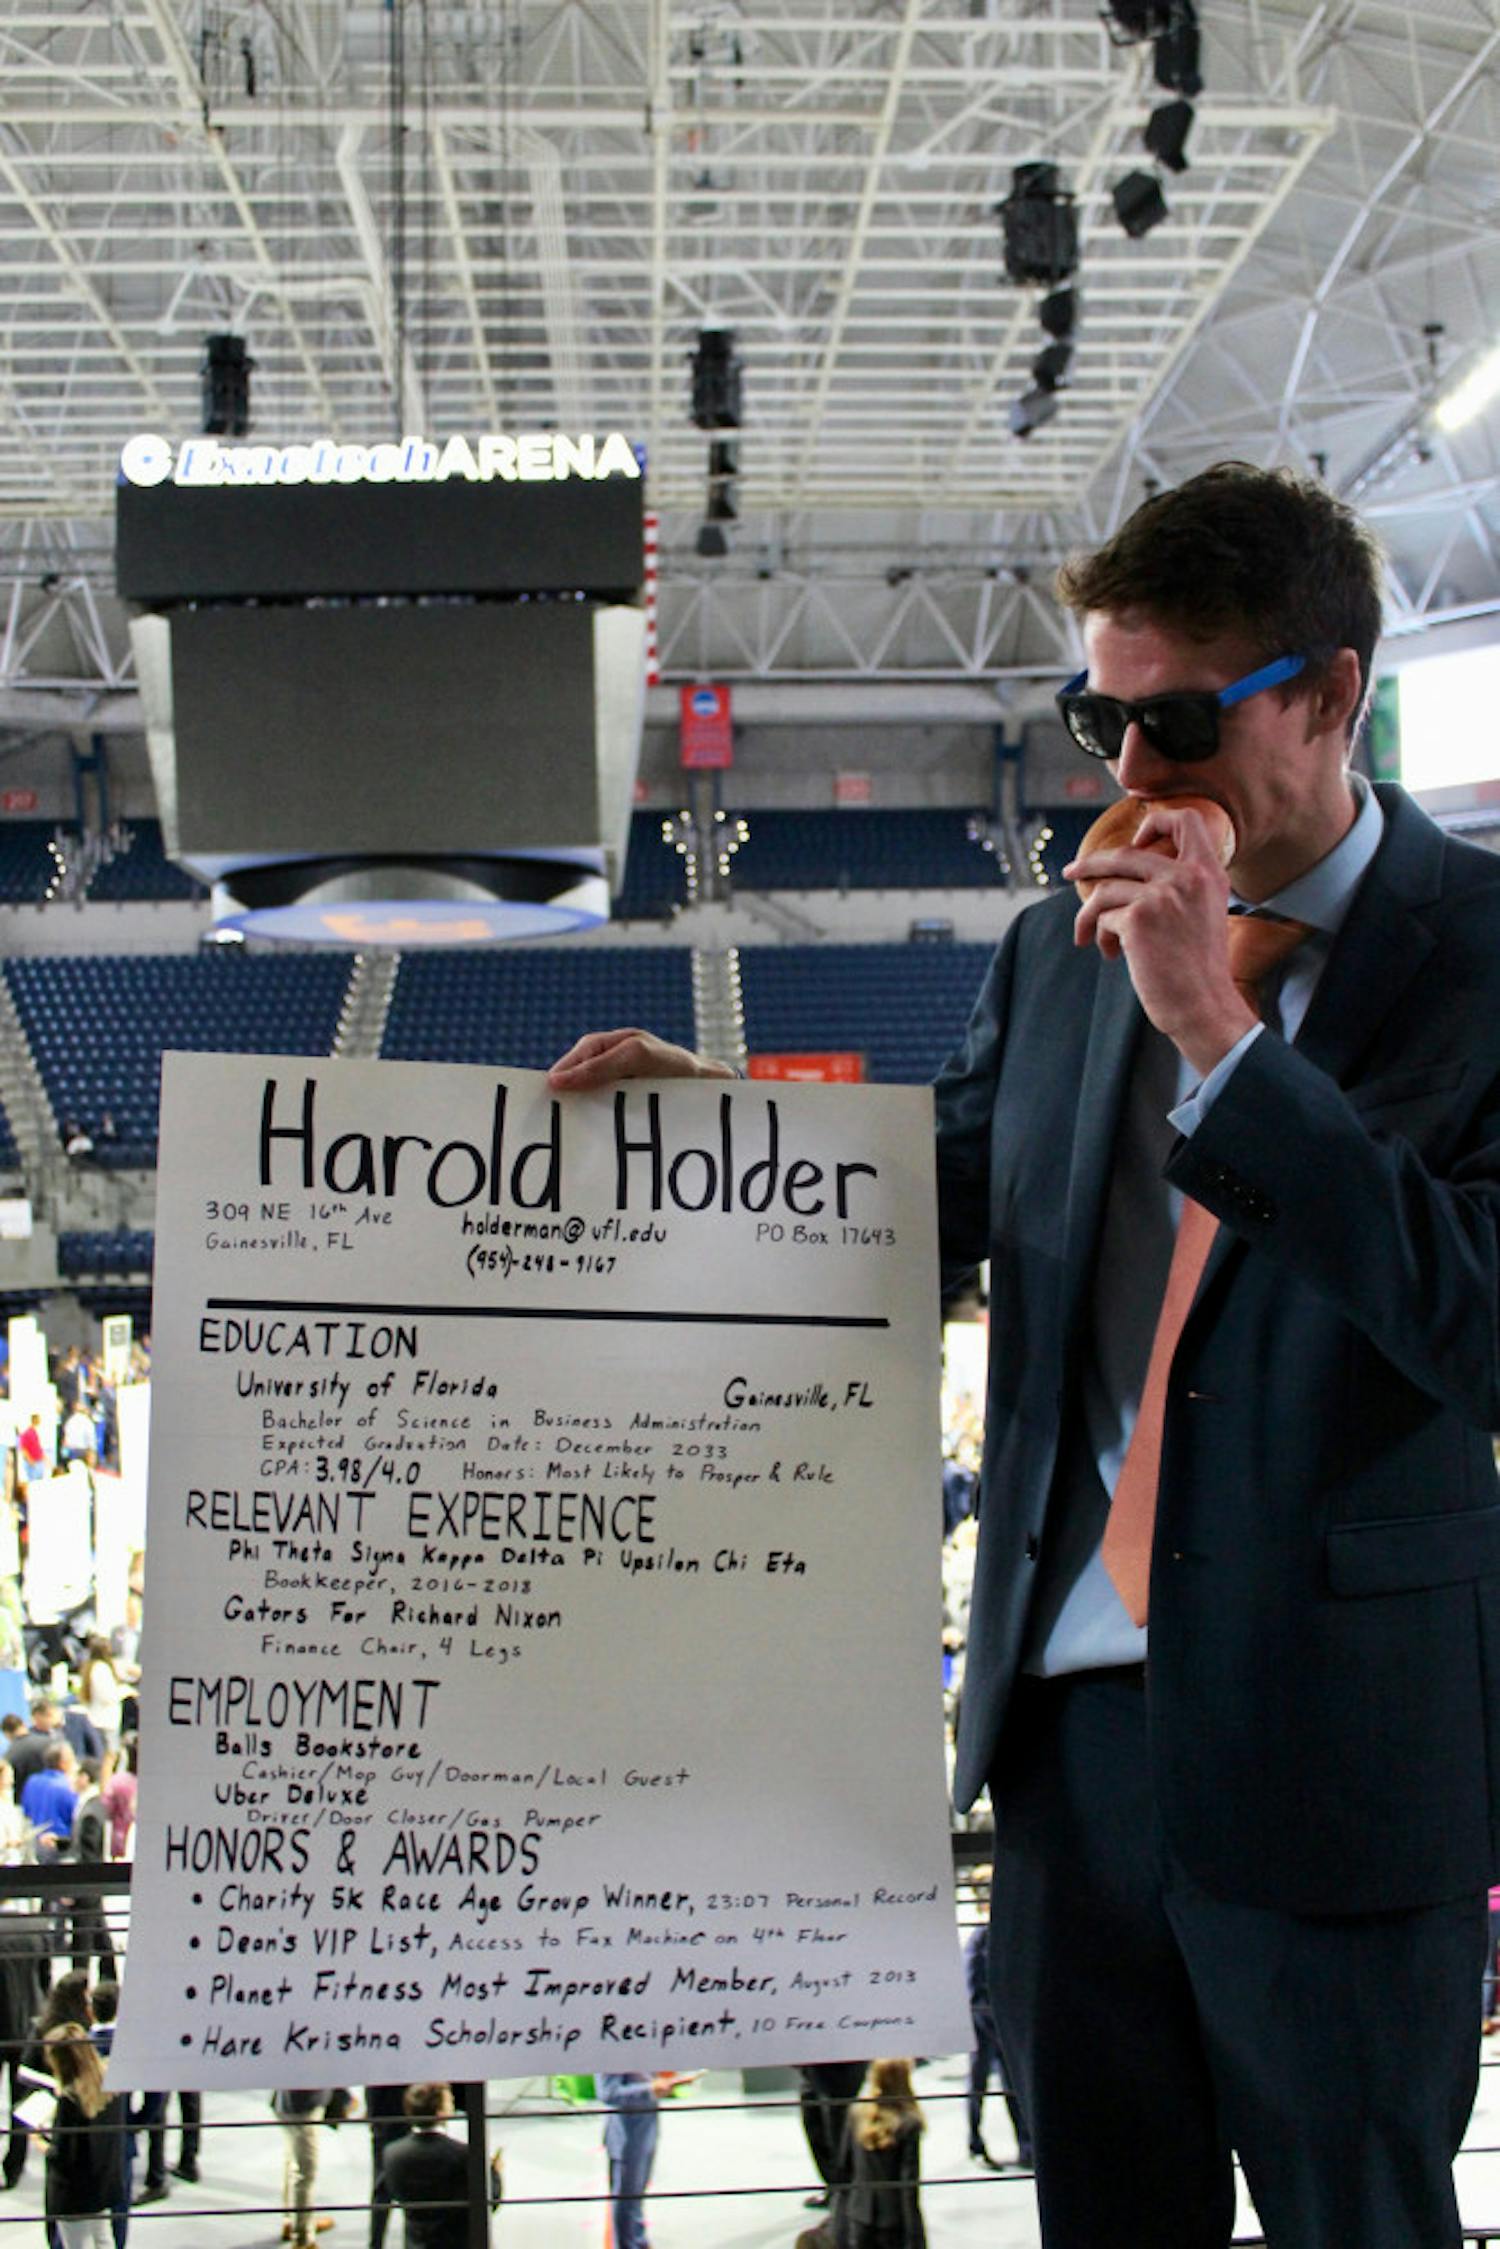 Kevin Kimbrough, a 23-year-old computer science engineering sixth year, played the character of “Harold Holder” to cheer up students and employers at Career Showcase.